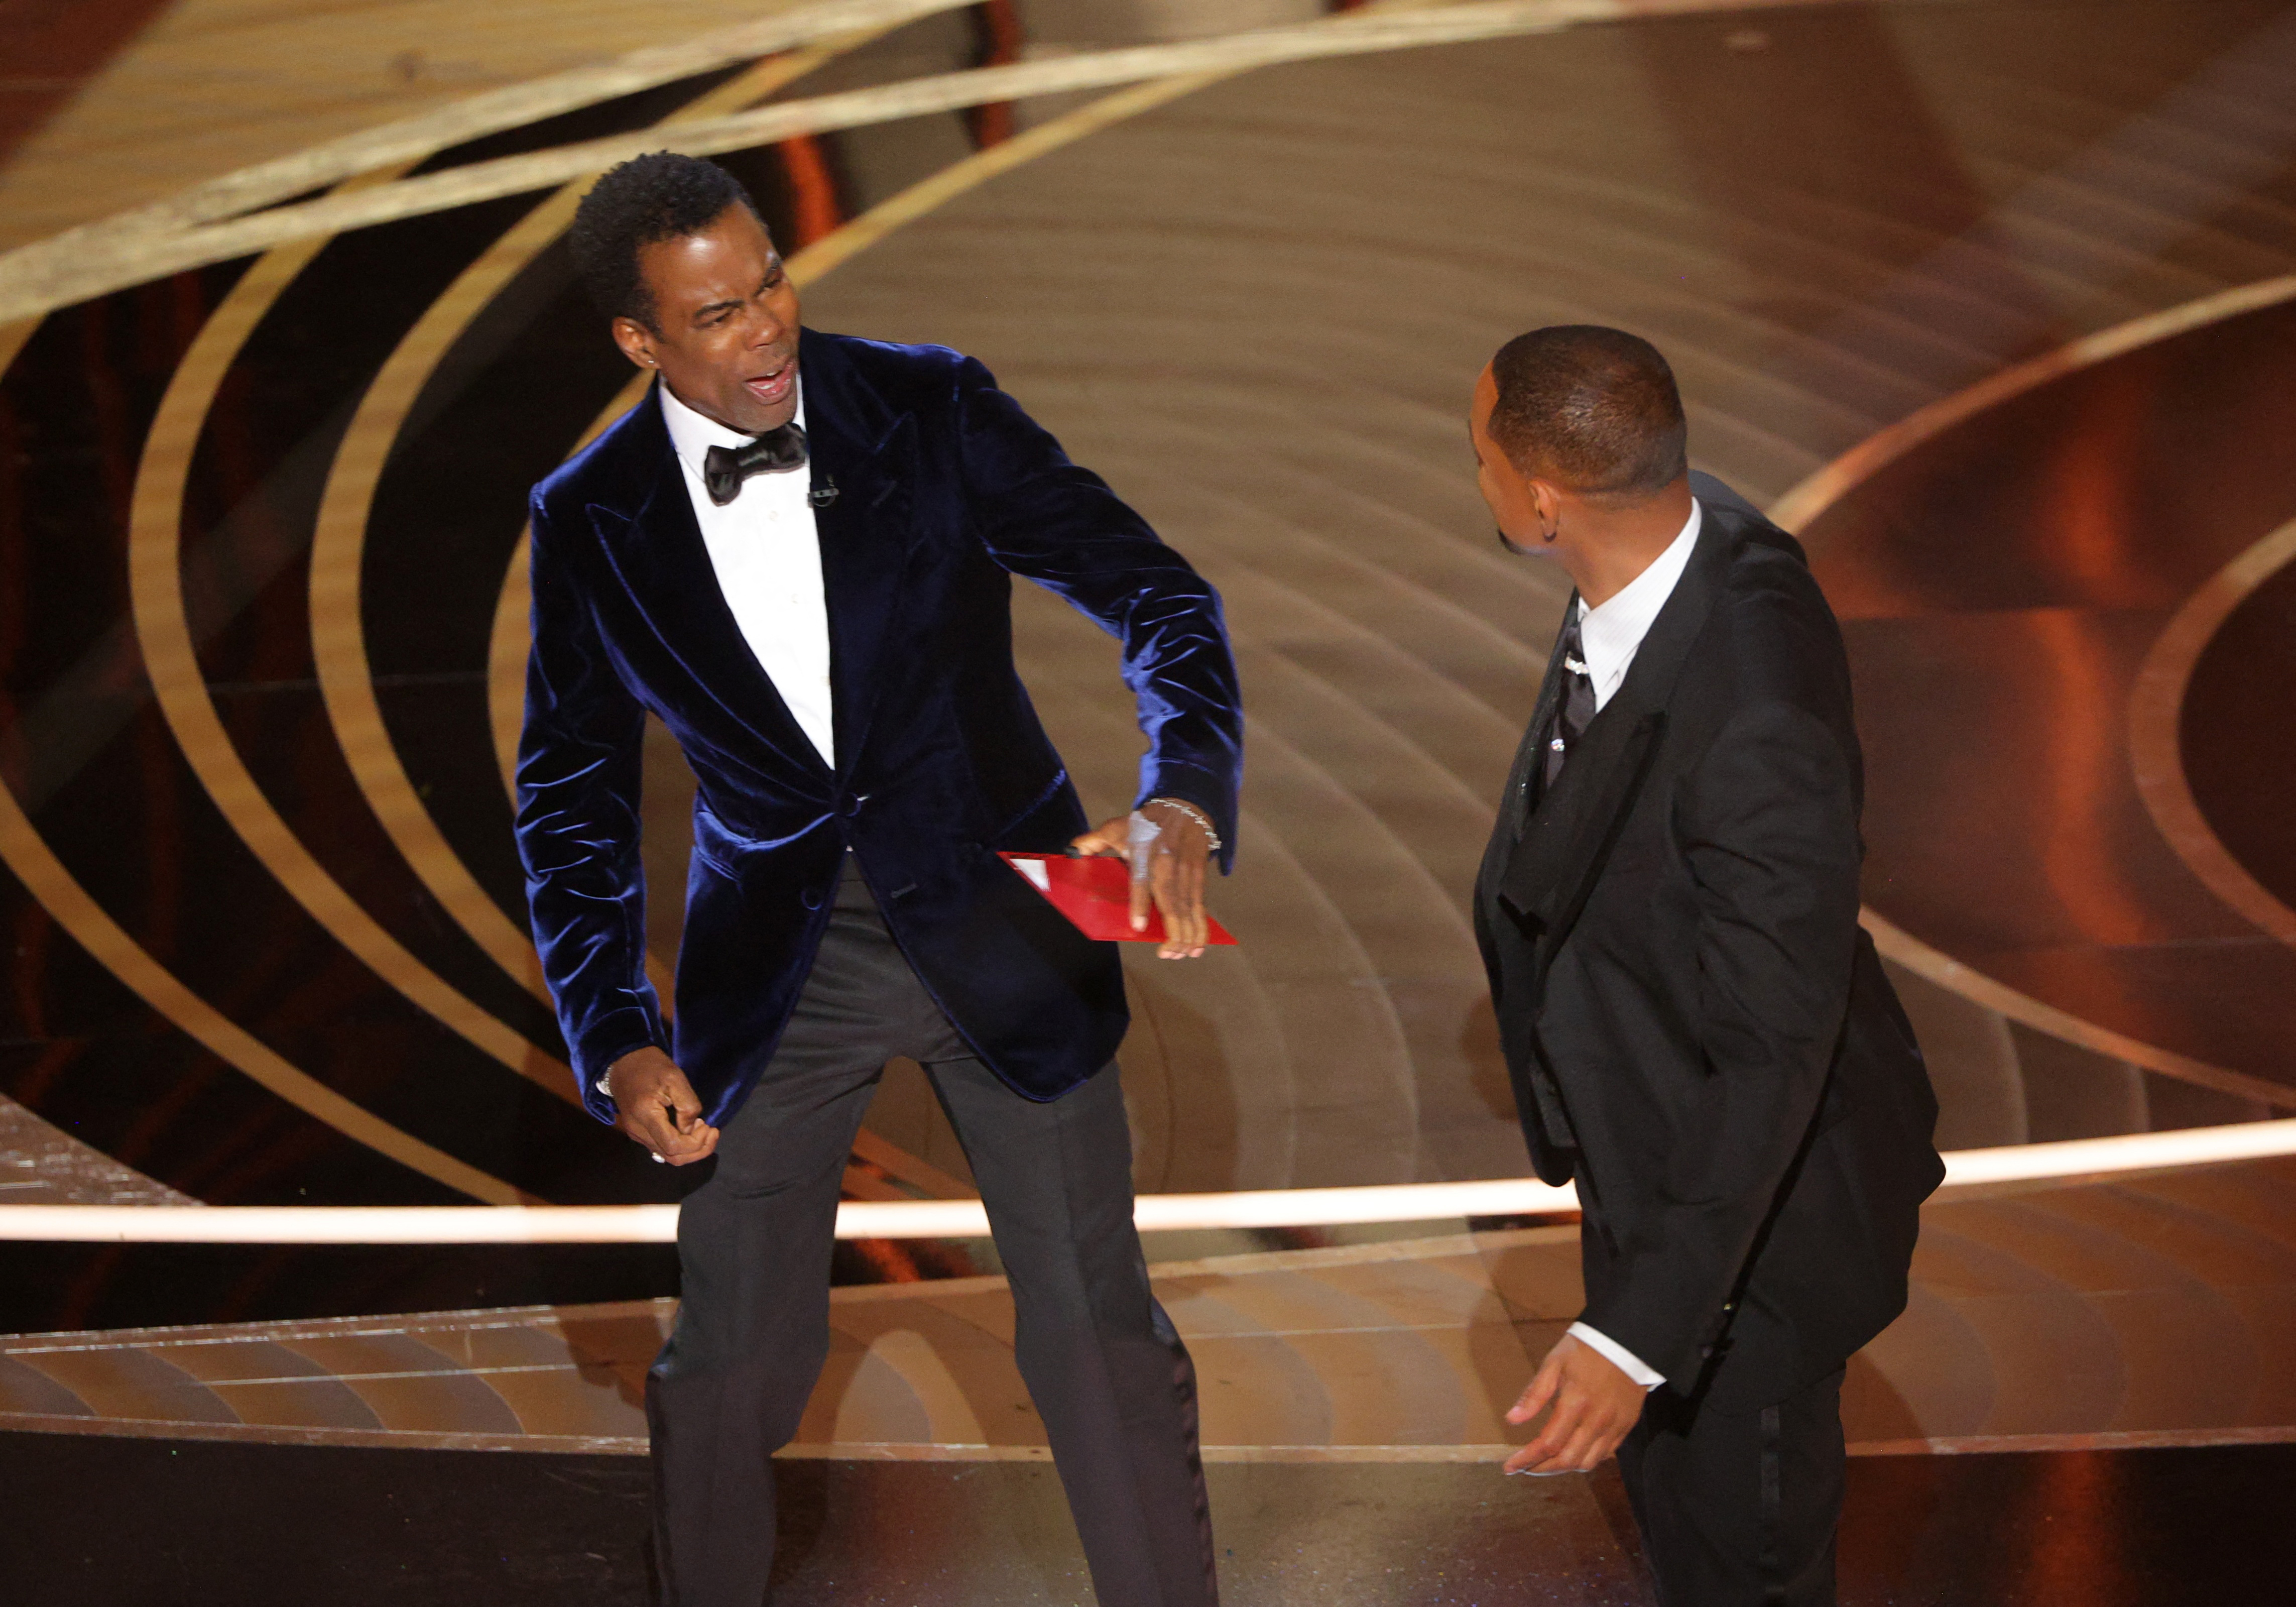 Chris Rock reacts after being hit by Will Smith (R) as Rock spoke on stage during the 94th Academy Awards in Hollywood, Los Angeles, California, U.S., March 27, 2022. REUTERS/Brian Snyder